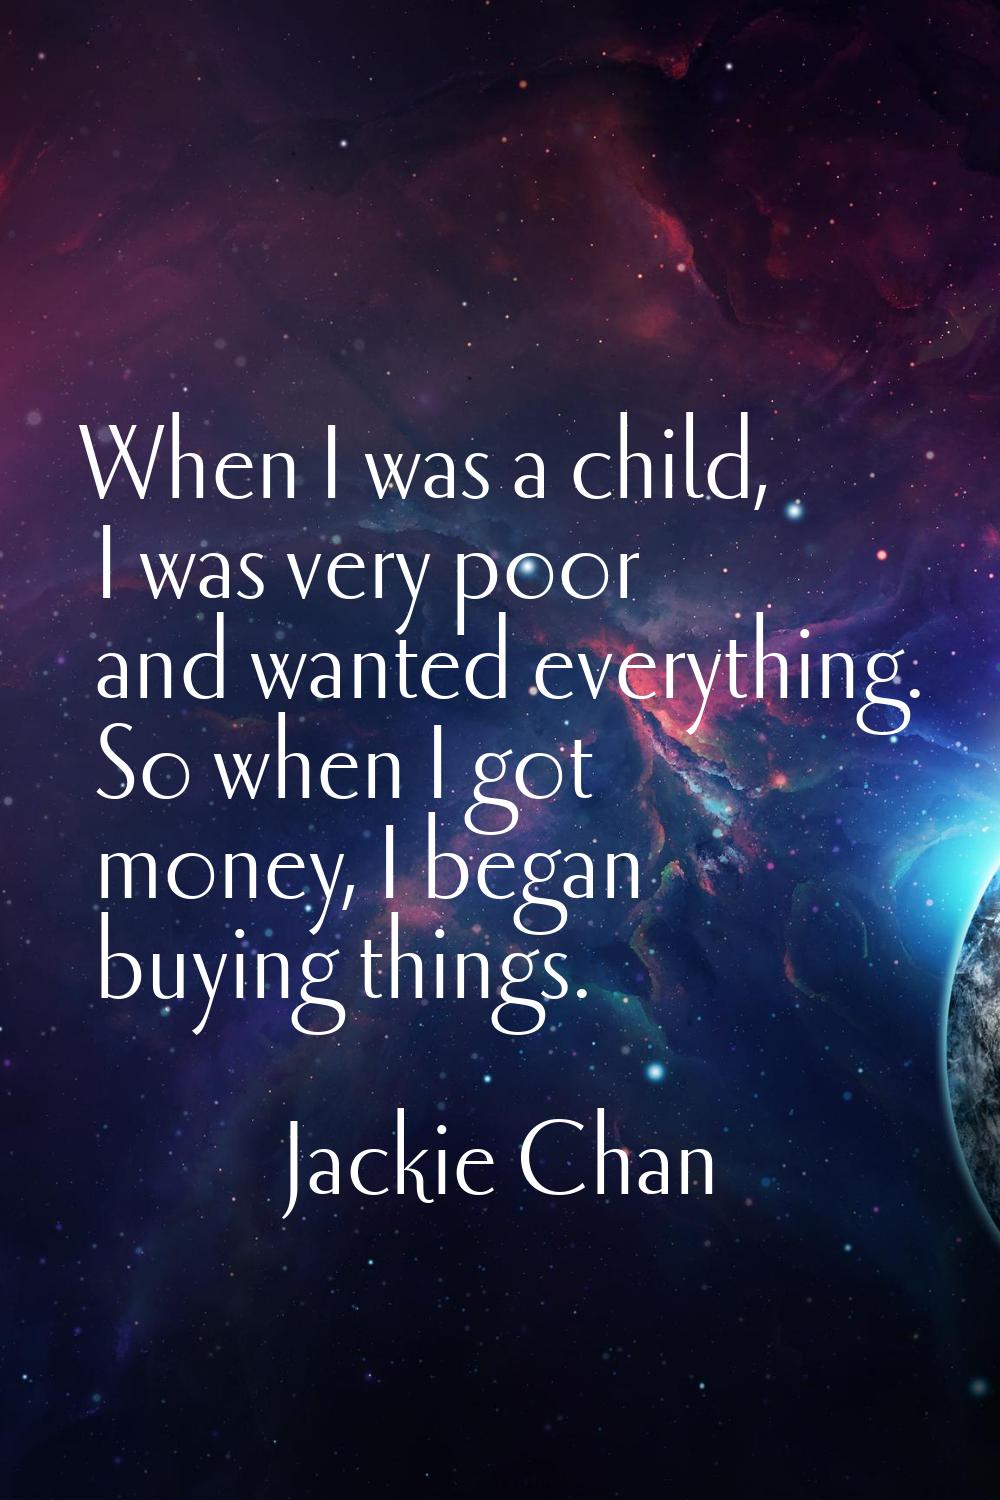 When I was a child, I was very poor and wanted everything. So when I got money, I began buying thin